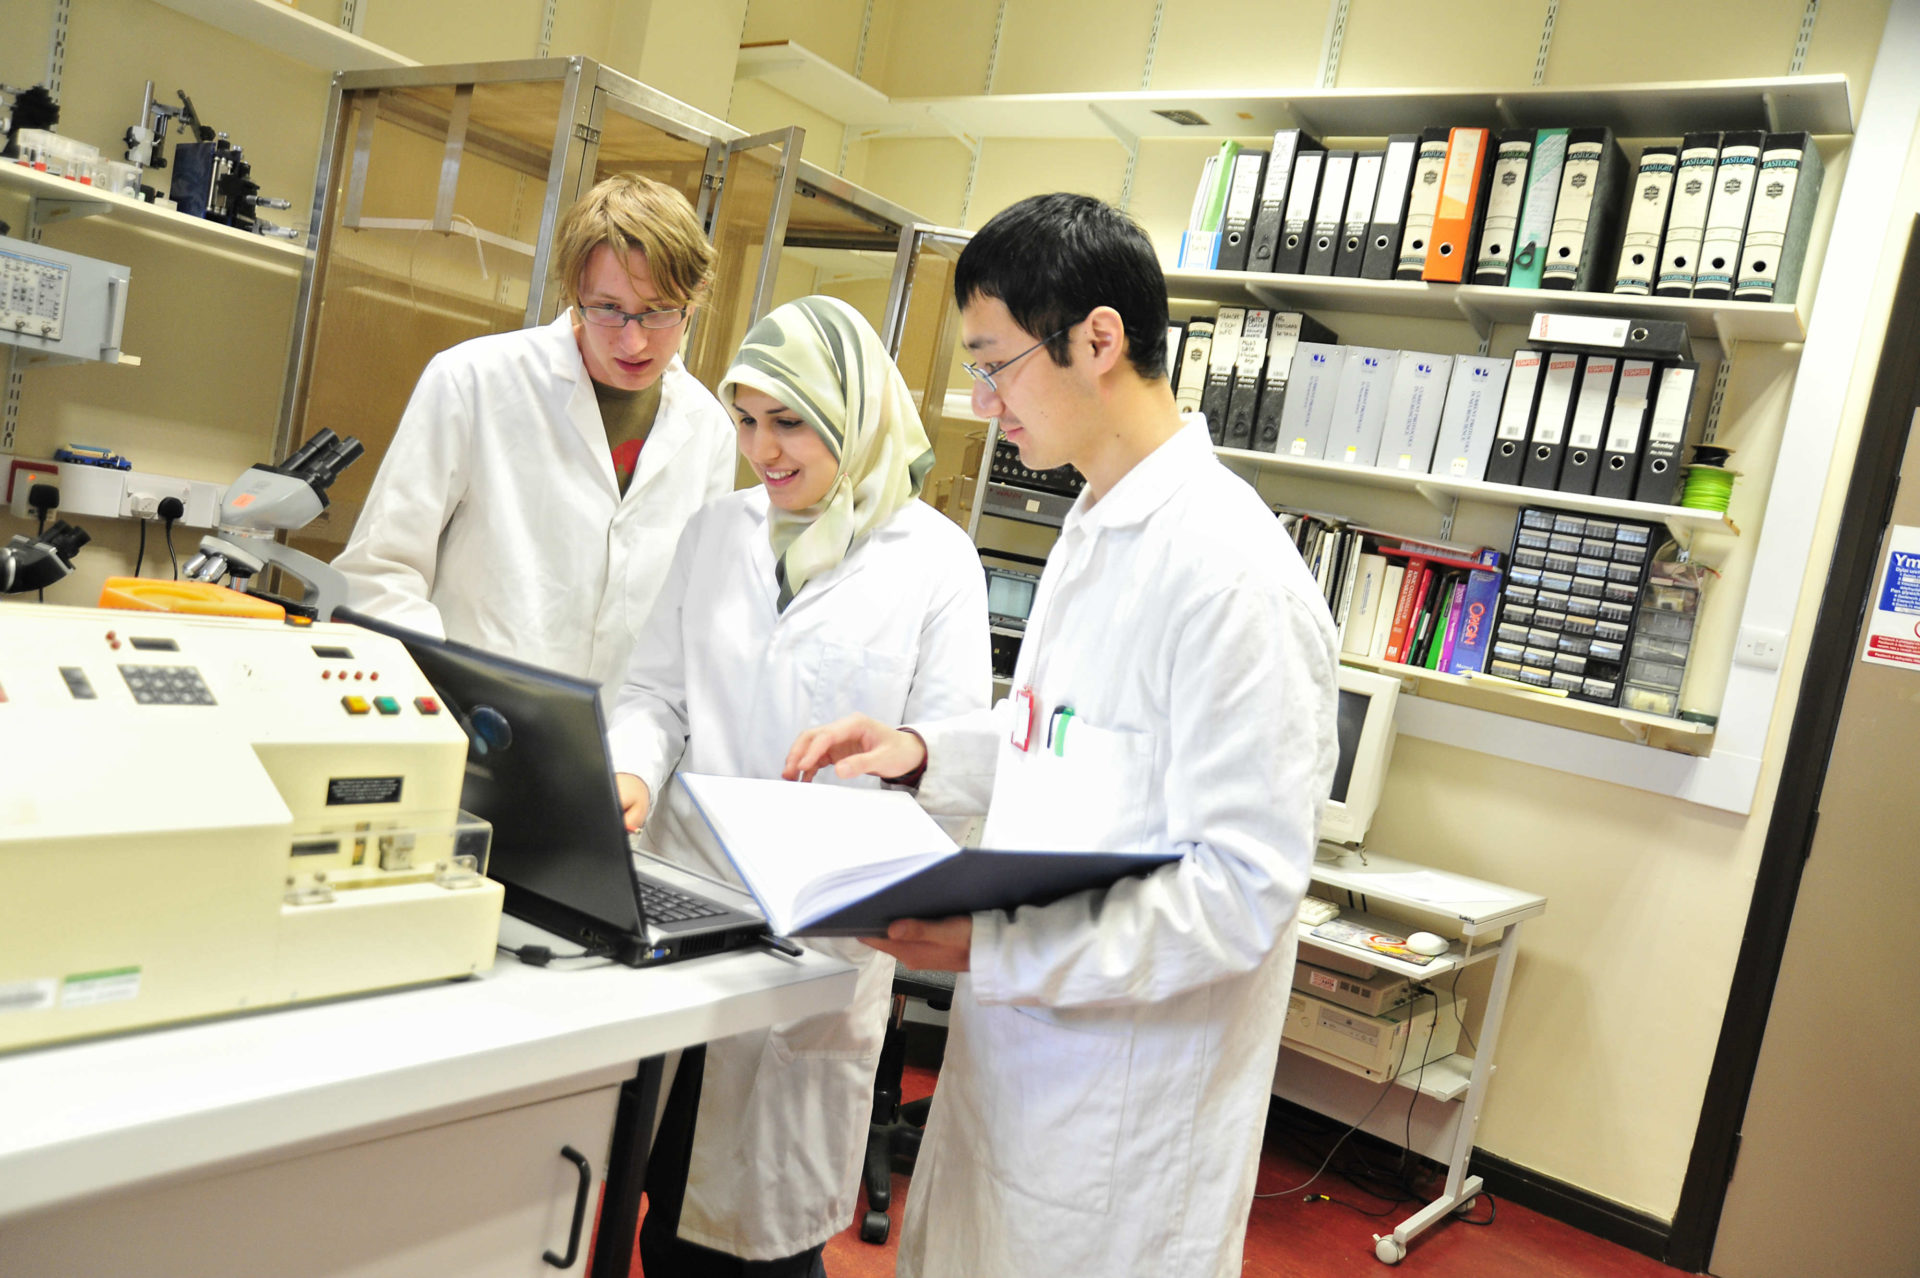 FUNDING ANNOUNCED FOR NEW GW4 CLINICAL PHD PROGRAMME